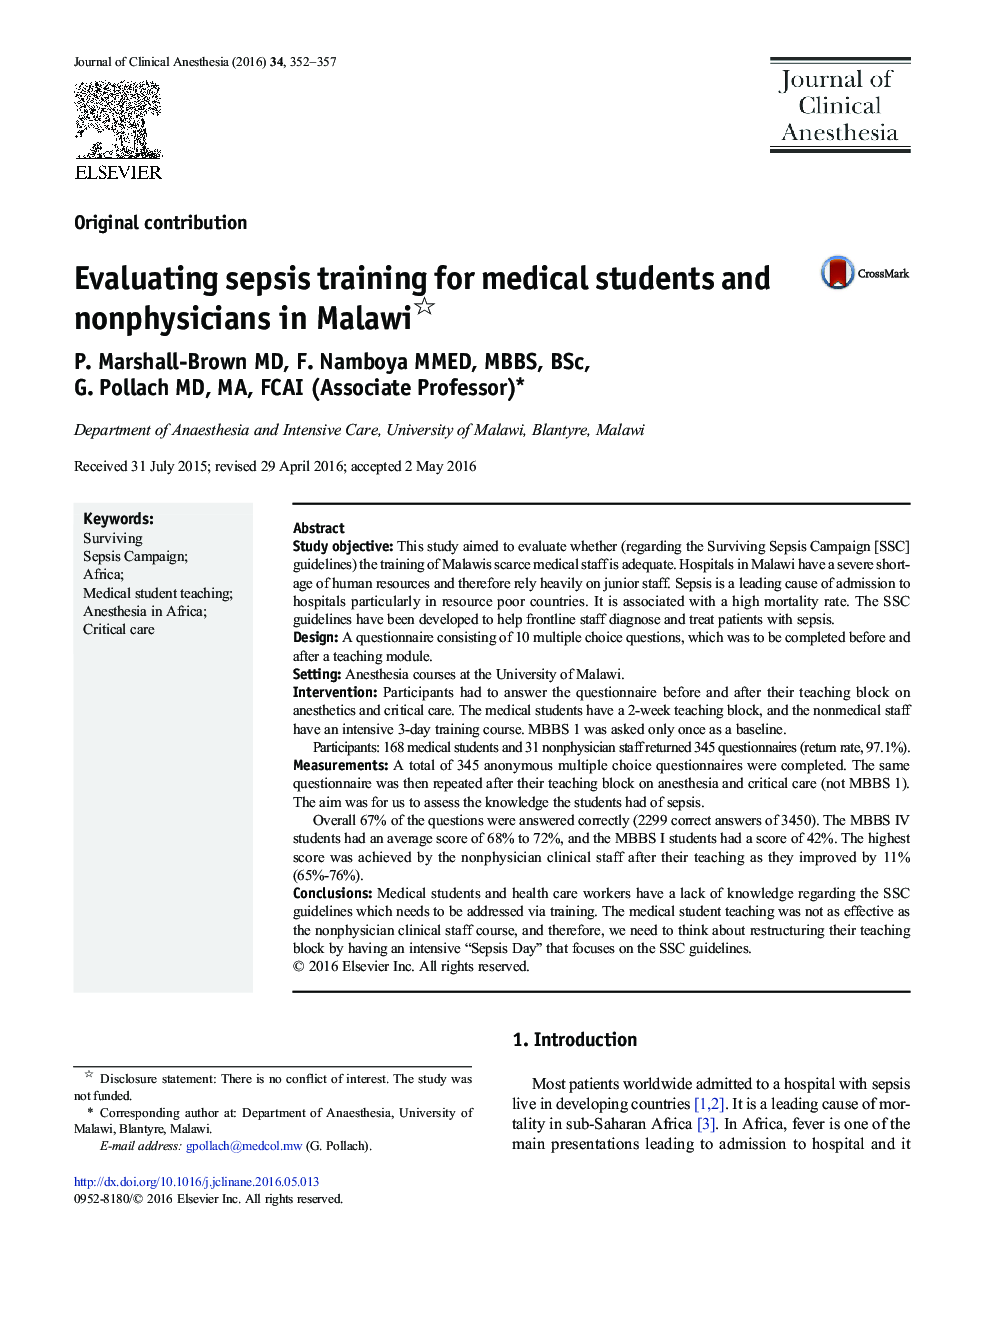 Evaluating sepsis training for medical students and nonphysicians in Malawi